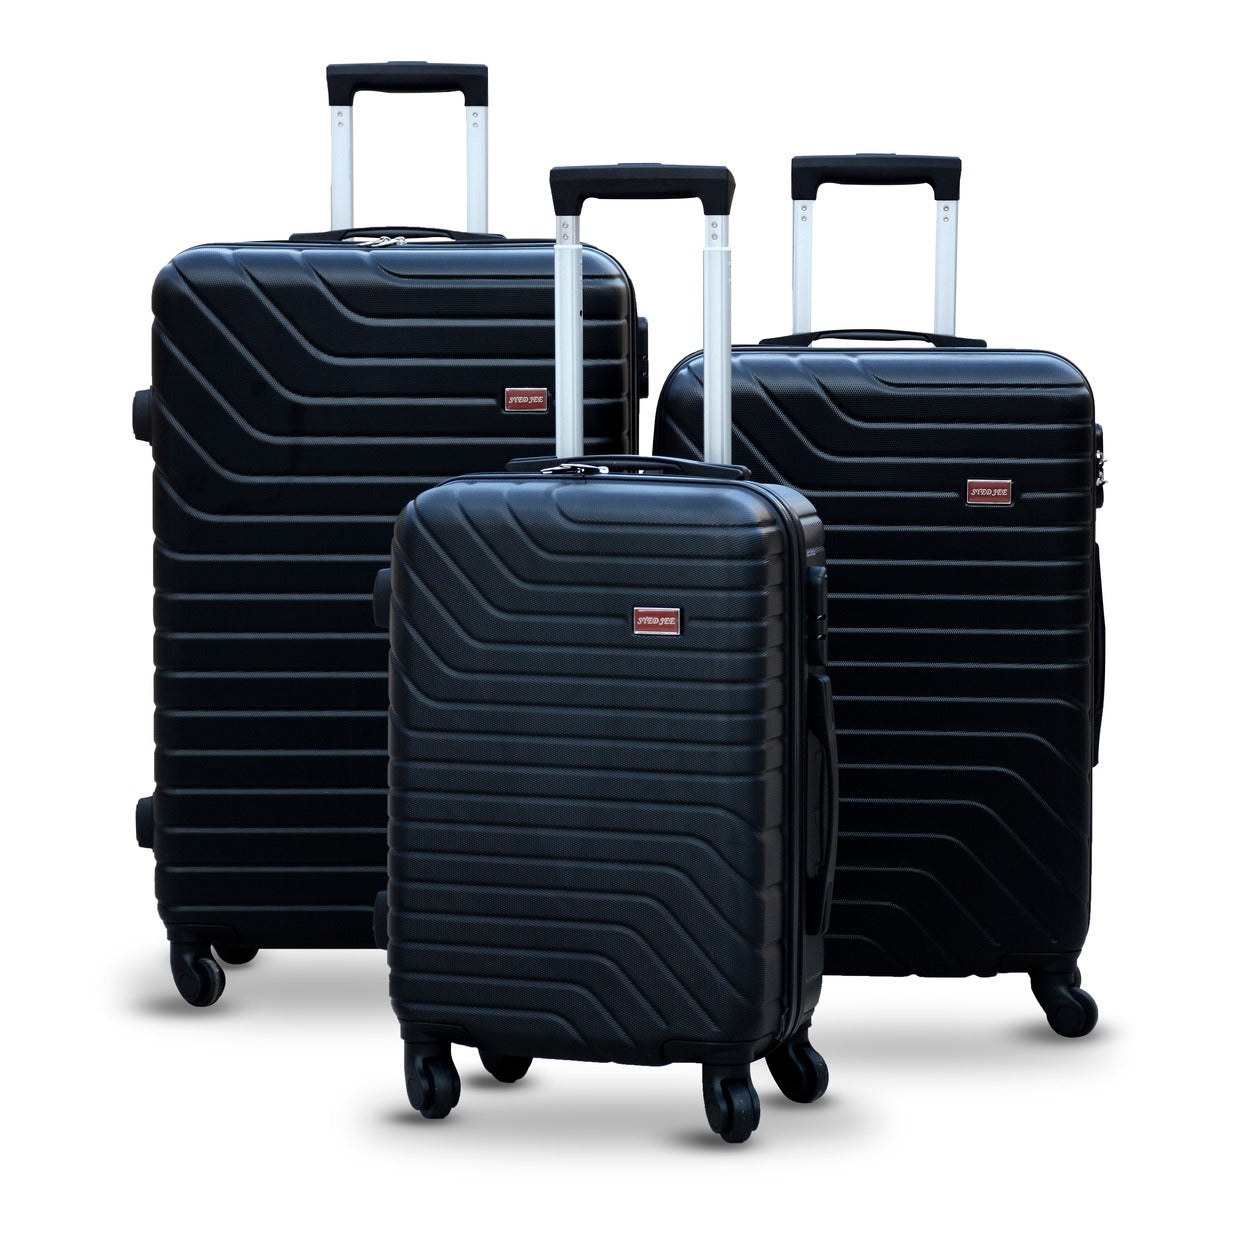 3 Pcs Full Set Black SJ New ABS Lightweight Travel Luggage 20" 24" 28 Inches Hard case Trolley Baggage | 2 Year Warranty